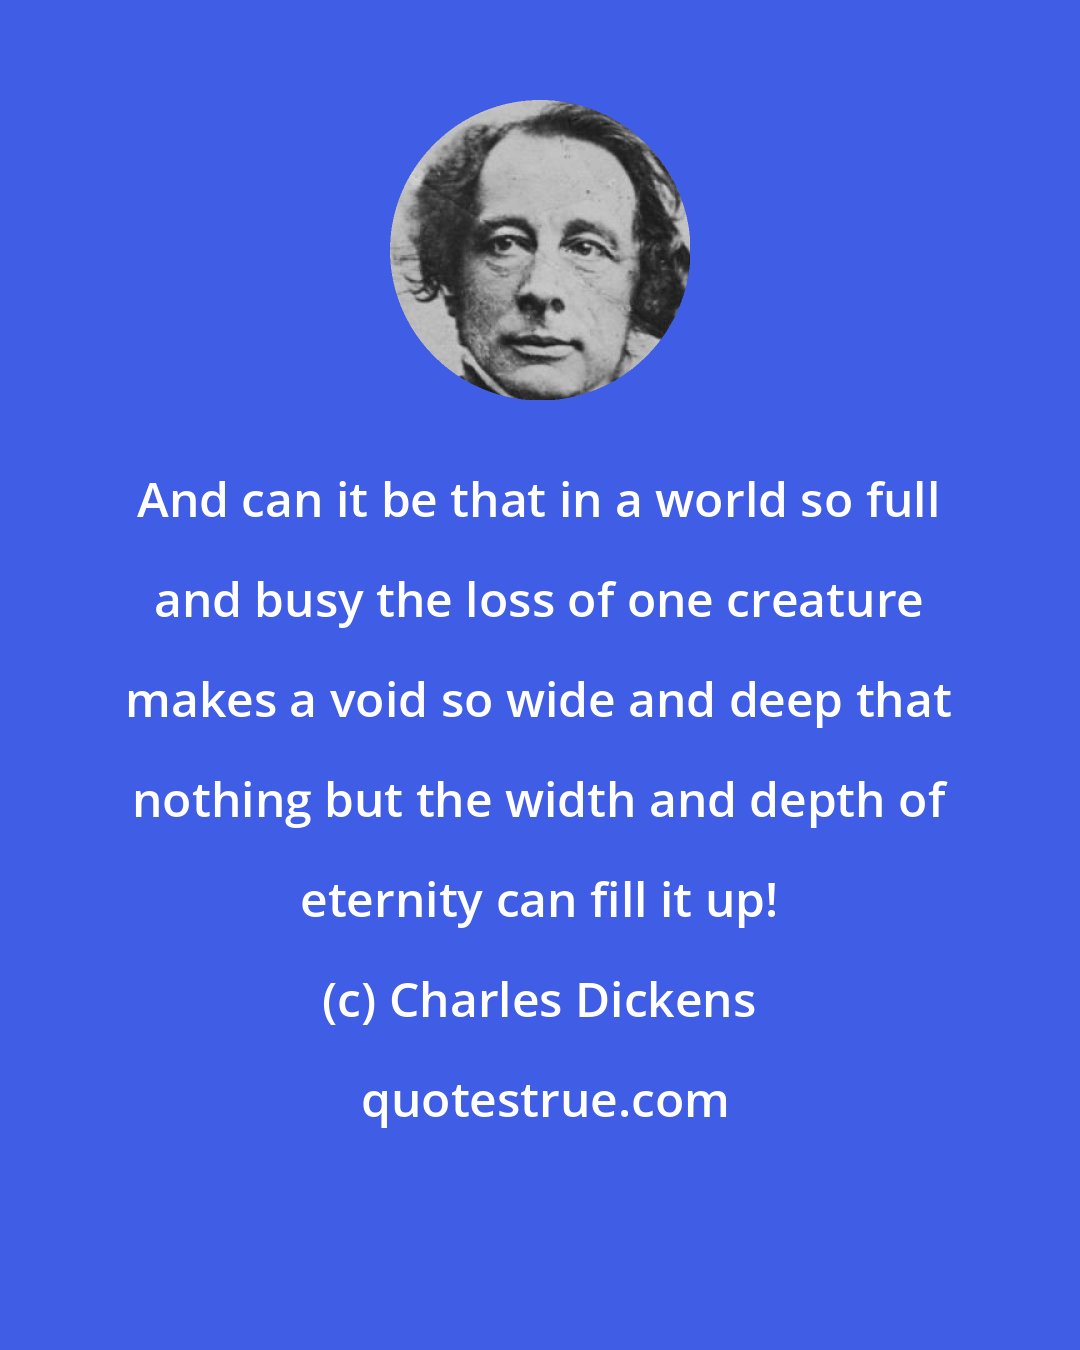 Charles Dickens: And can it be that in a world so full and busy the loss of one creature makes a void so wide and deep that nothing but the width and depth of eternity can fill it up!